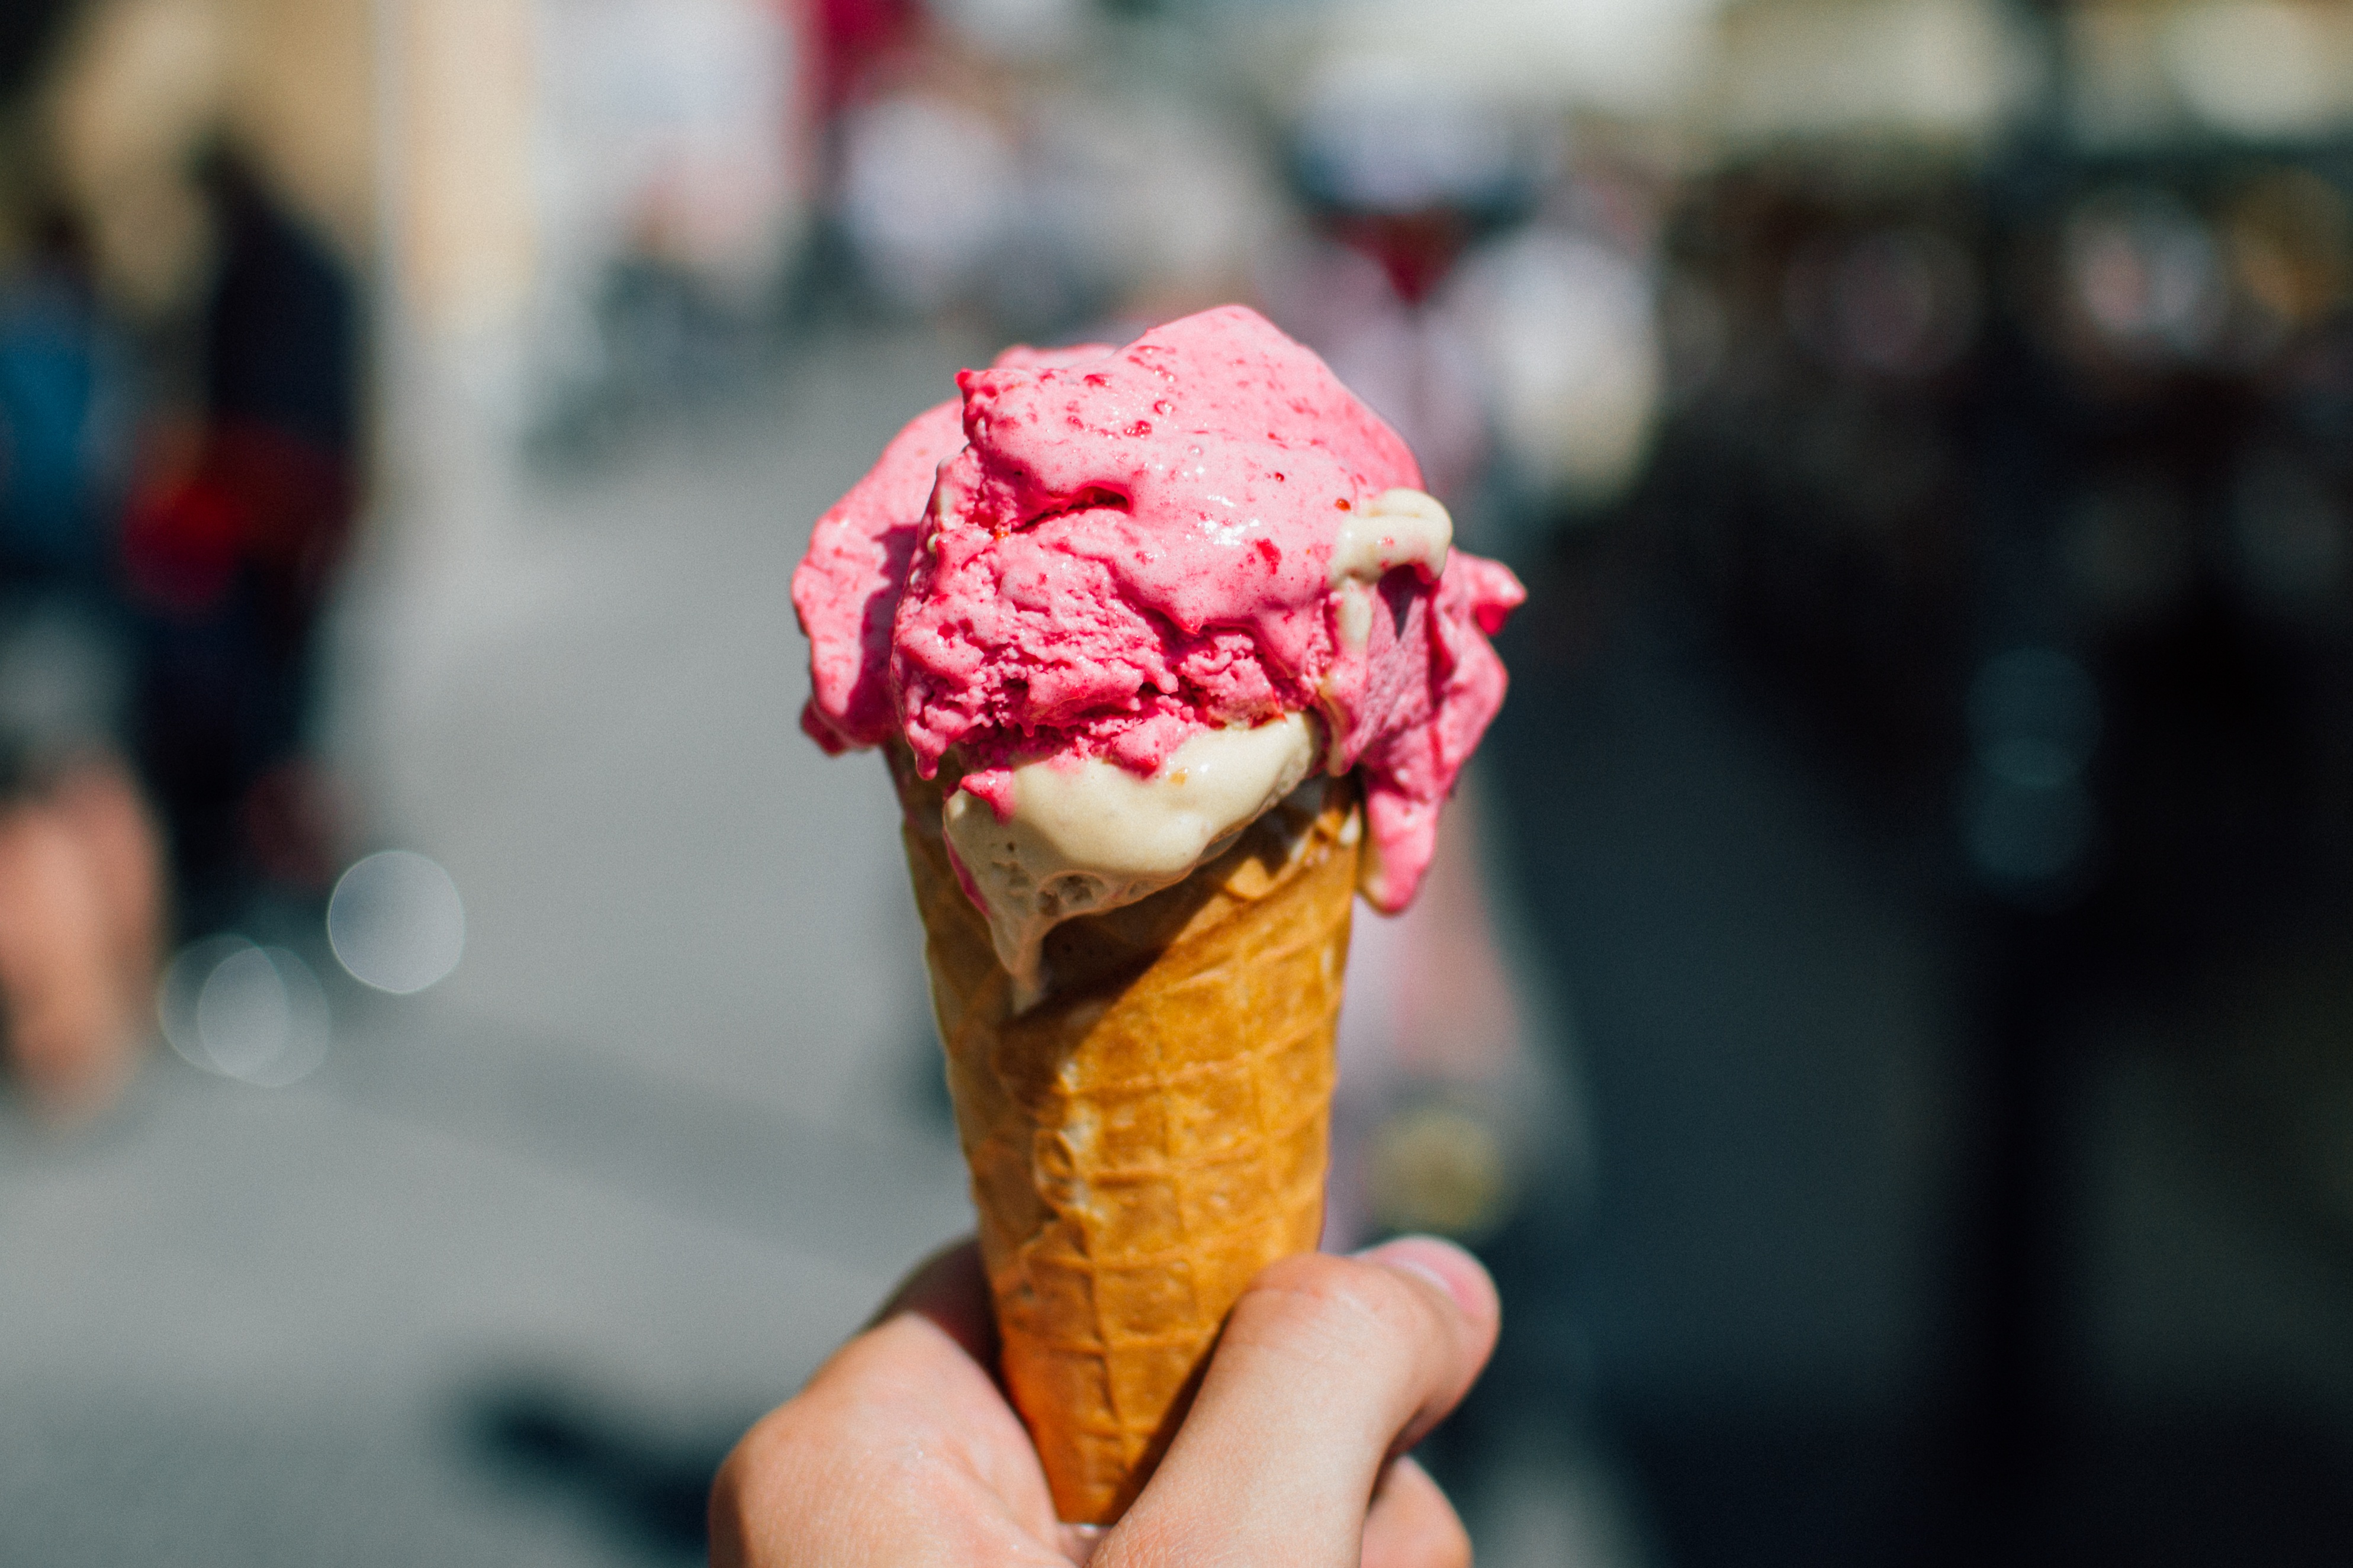 Image Understanding the microstructure of ice cream